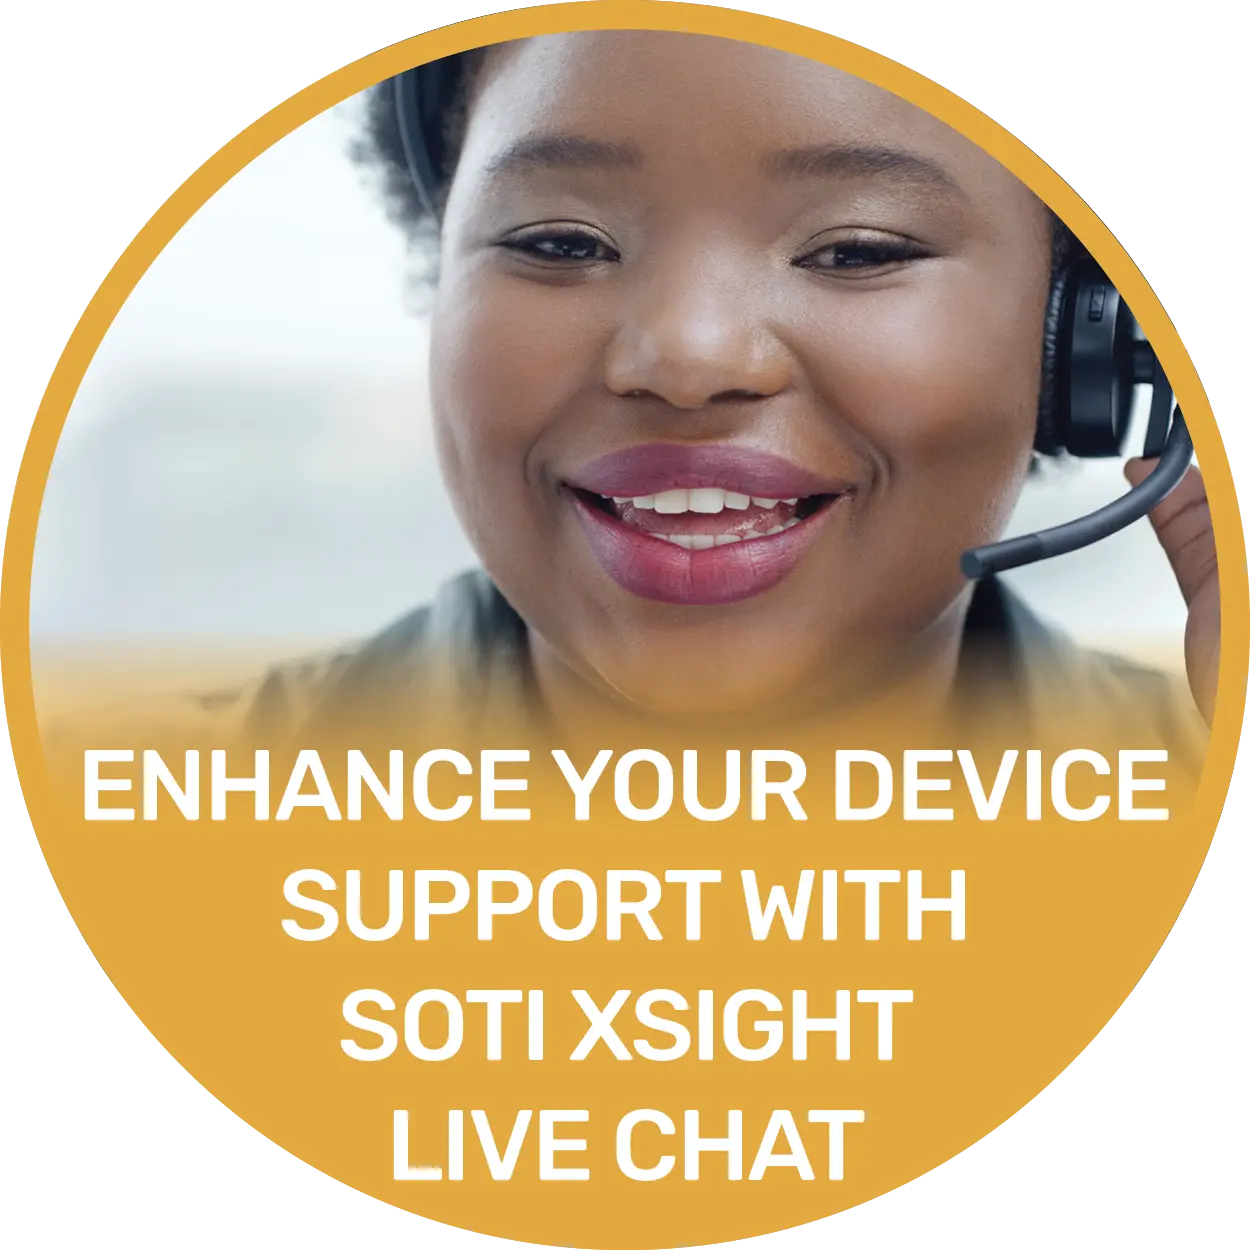 Enhance your device support with SOTI XSight live chat